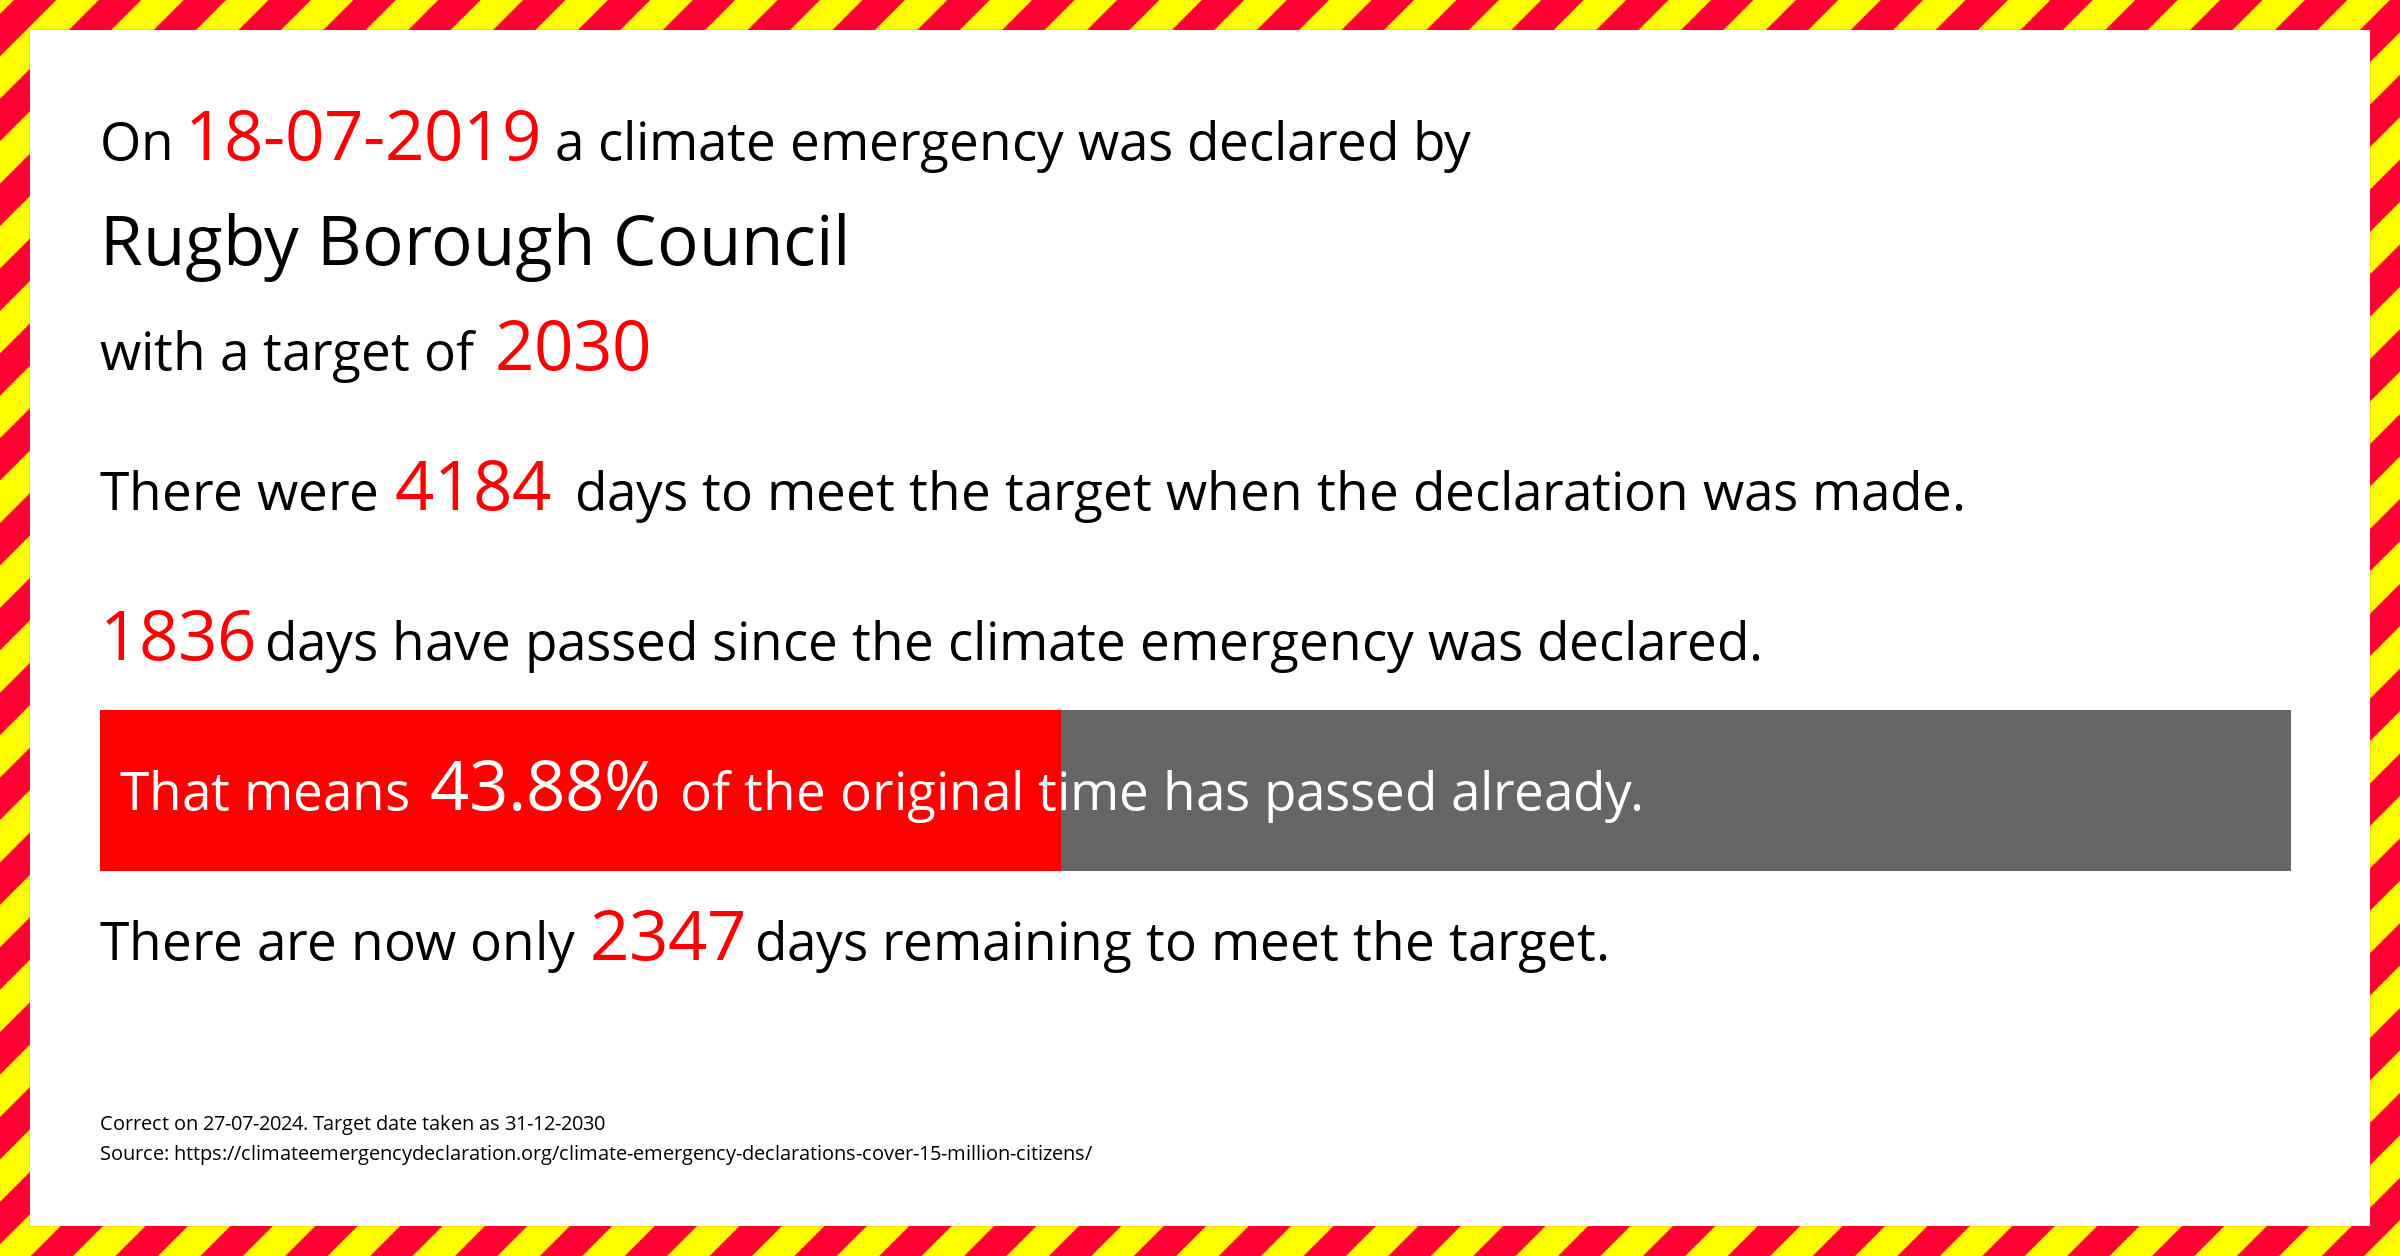 Rugby Borough Council declared a Climate emergency on Thursday 18th July 2019, with a target of 2030.